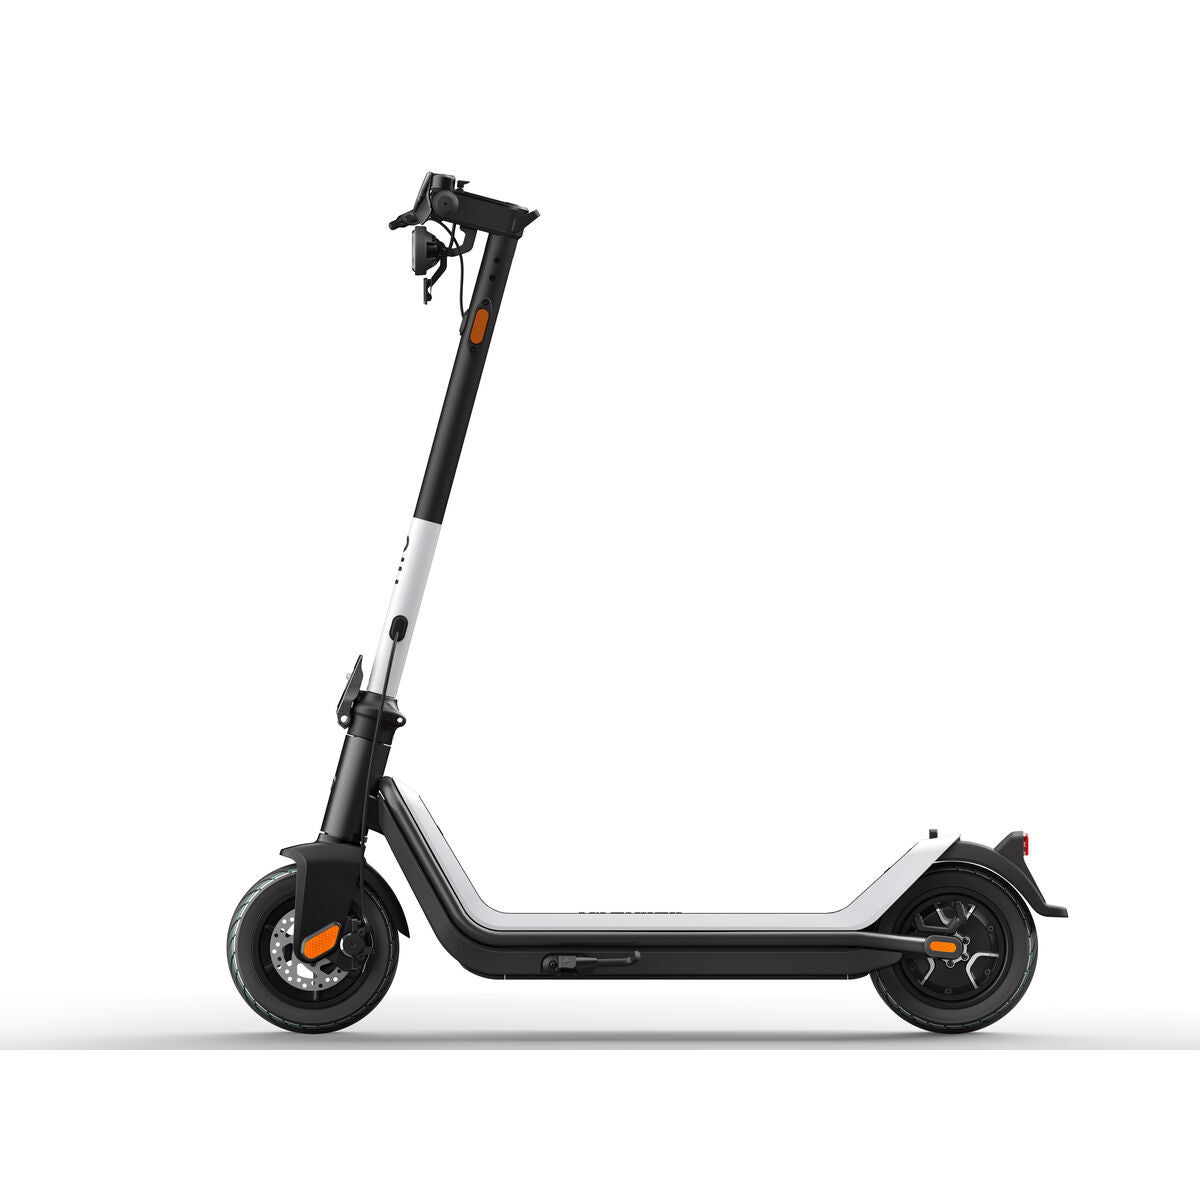 Electric Scooter Niu KQi3 Sport, Niu, Sports and outdoors, Urban mobility, electric-scooter-niu-kqi3-sport, Brand_Niu, category-reference-2609, category-reference-2629, category-reference-2904, category-reference-t-19681, category-reference-t-19756, category-reference-t-19876, category-reference-t-21245, Condition_NEW, deportista / en forma, Price_700 - 800, RiotNook